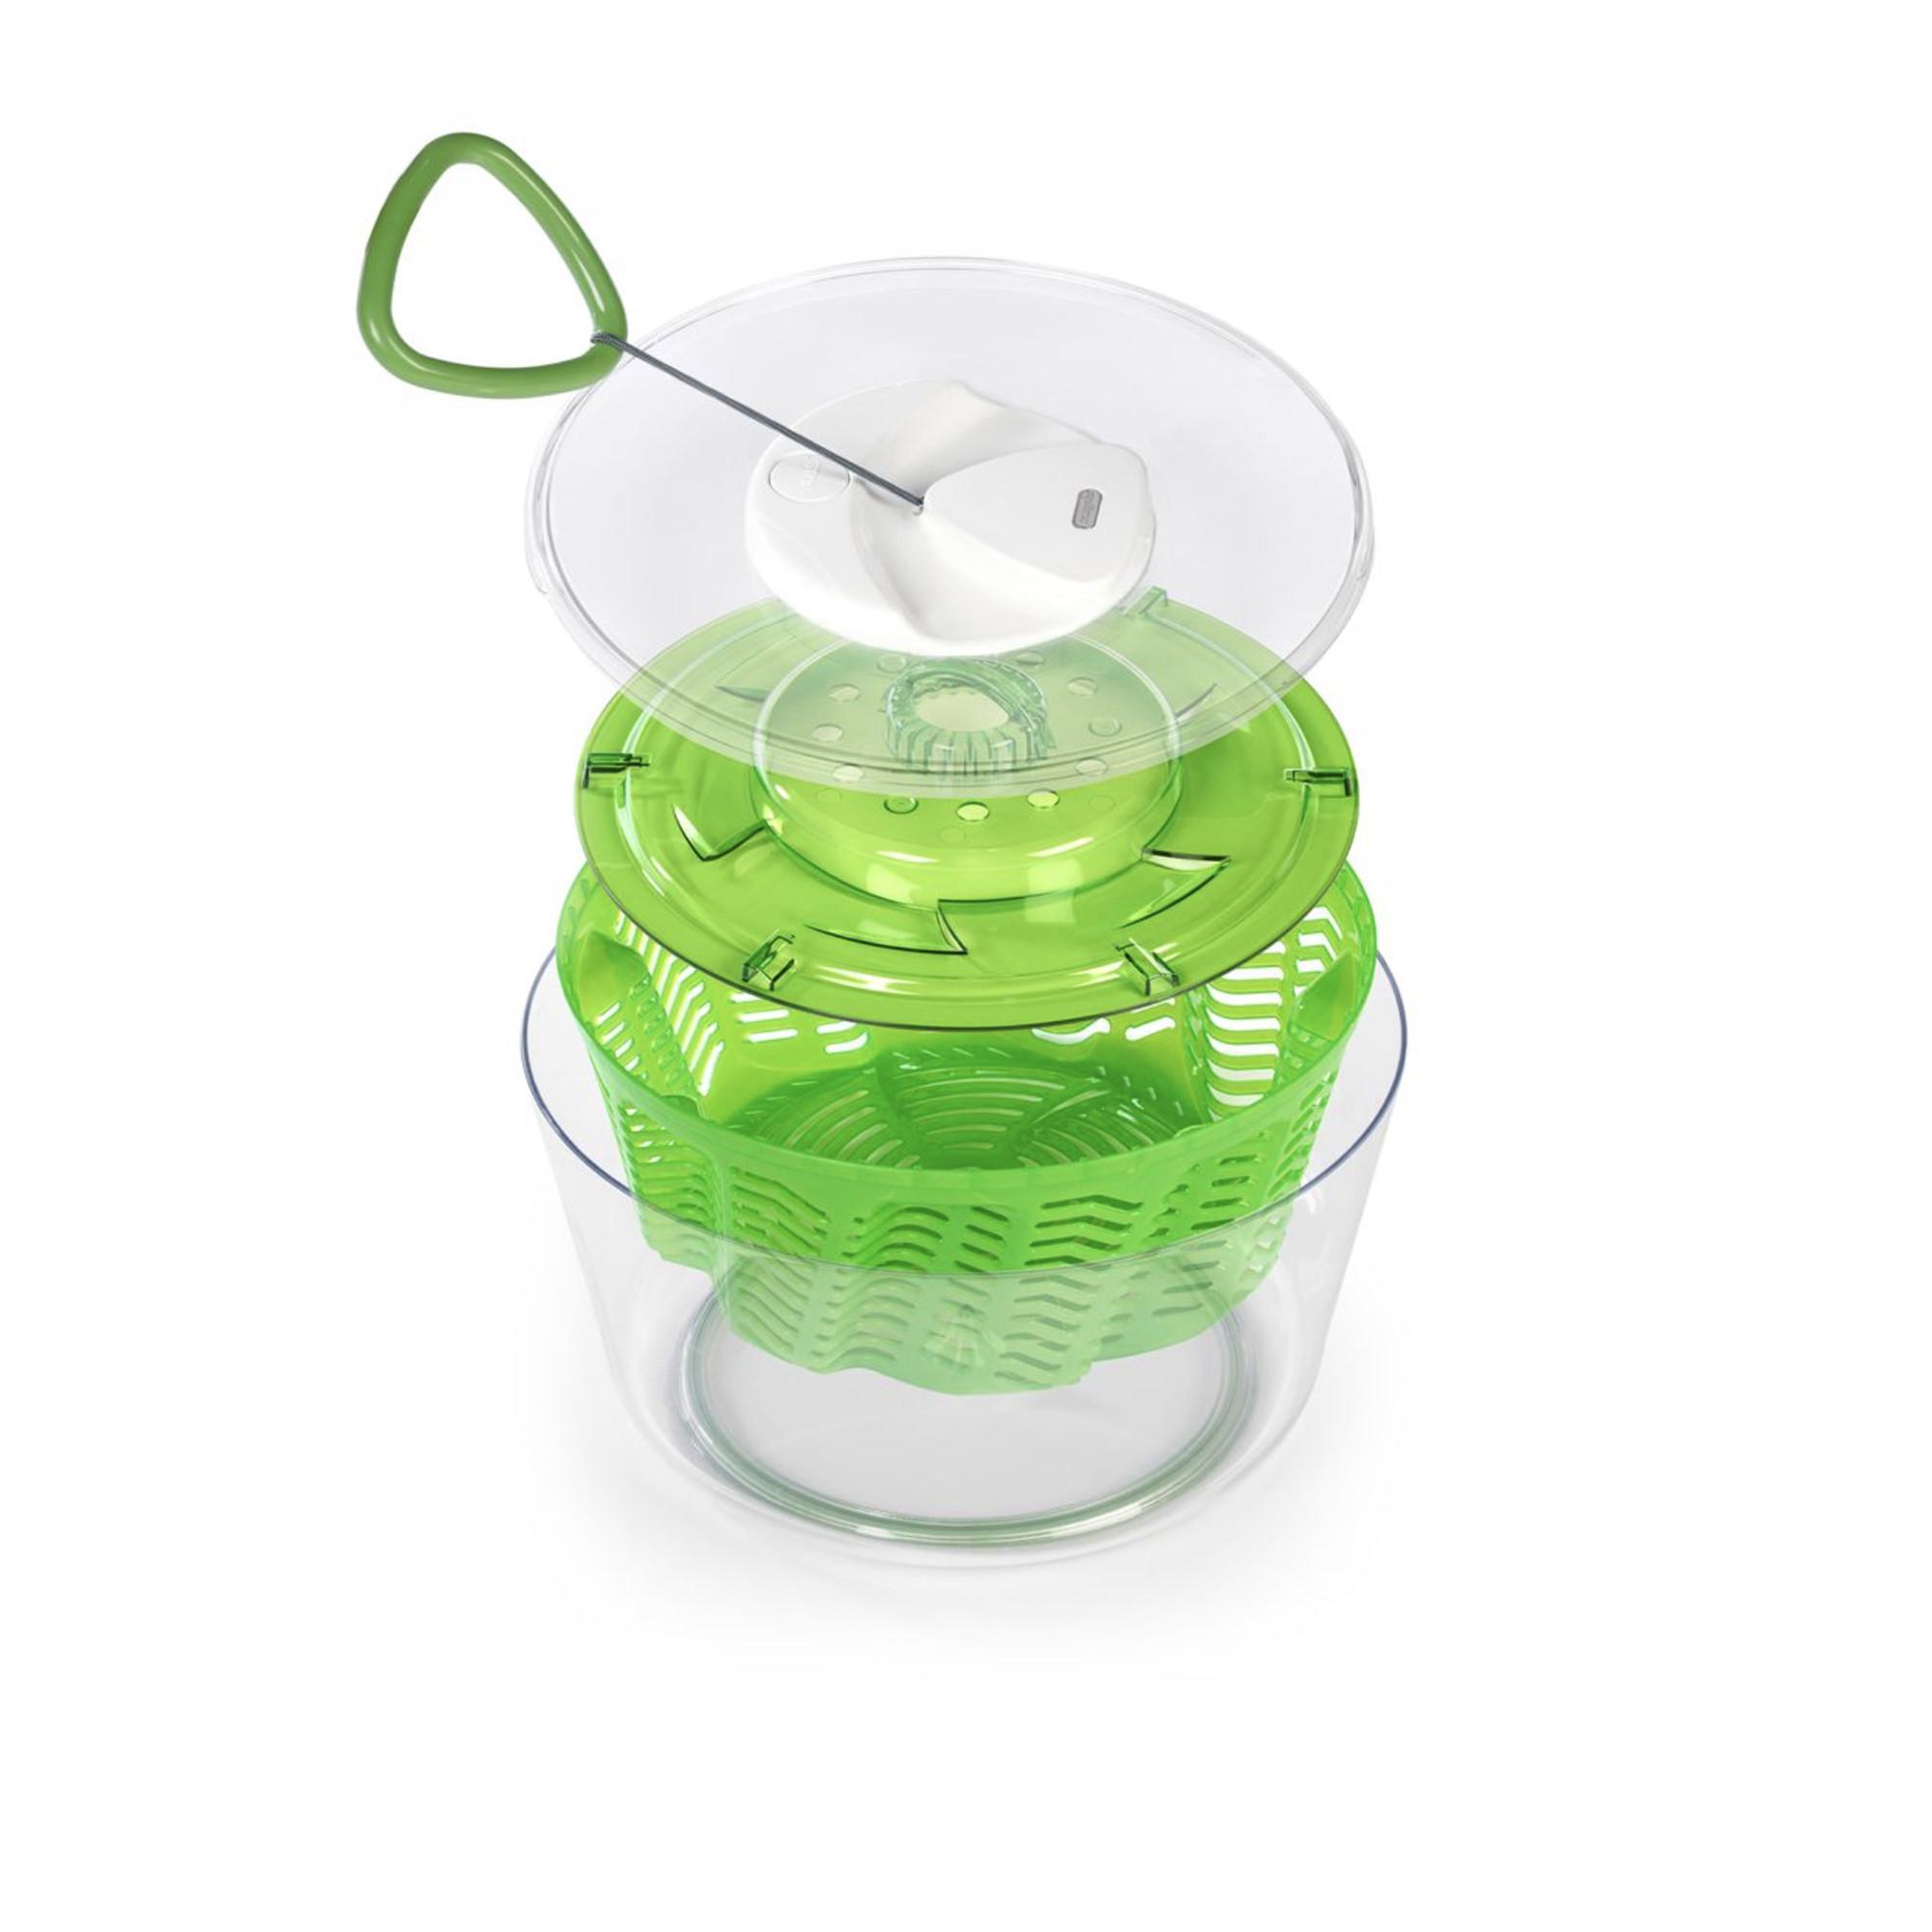 Zyliss Easy Spin 2 Salad Spinner Large Green Image 3